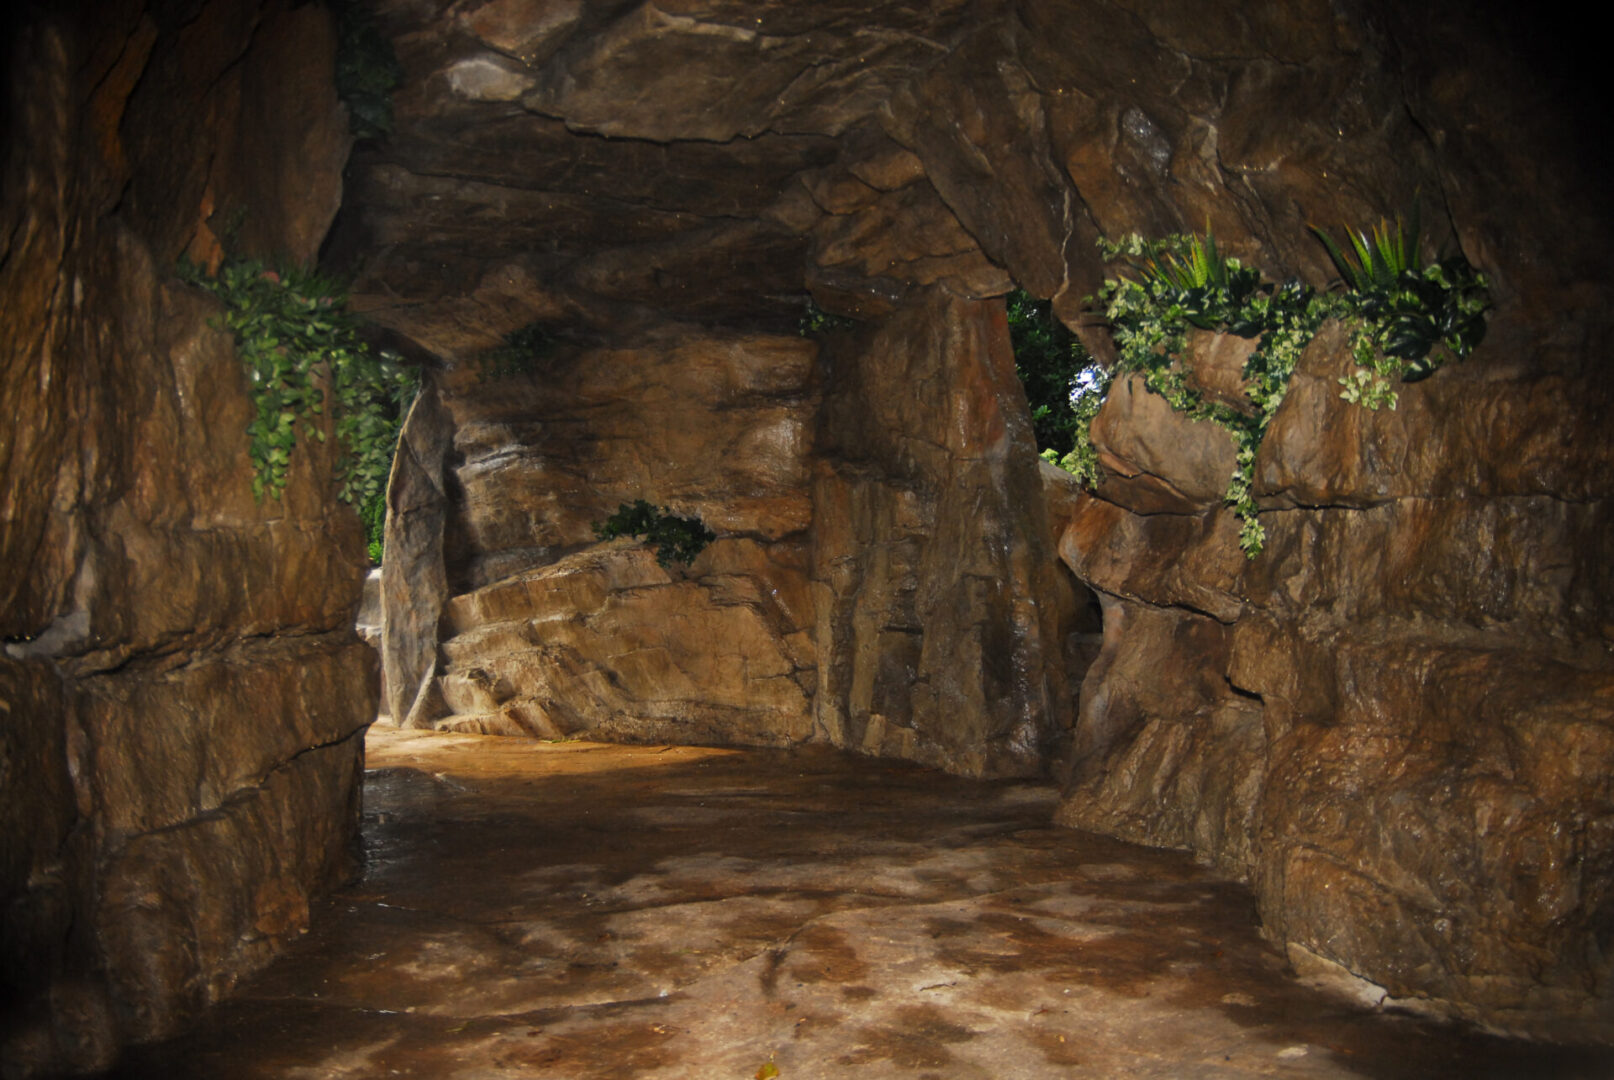 A cave with plants growing on the walls.